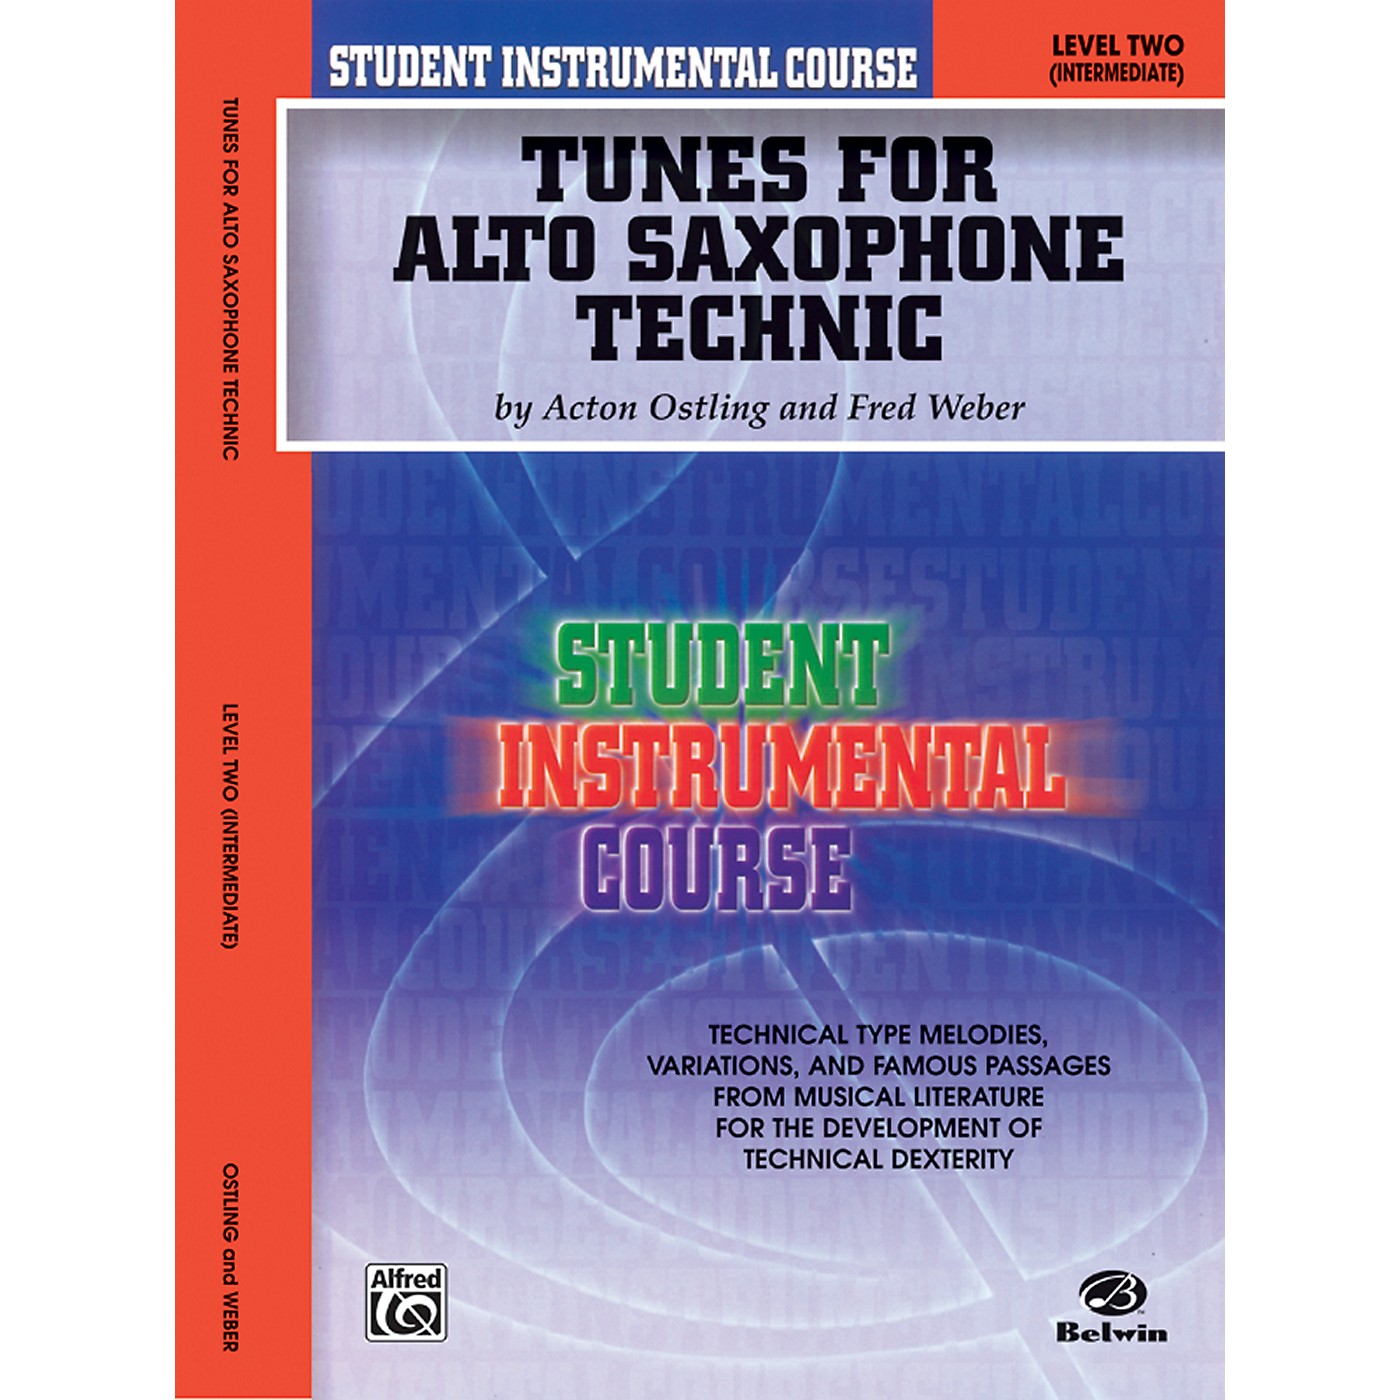 Alfred Student Instrumental Course Tunes for Alto Saxophone Technic Level II Book thumbnail